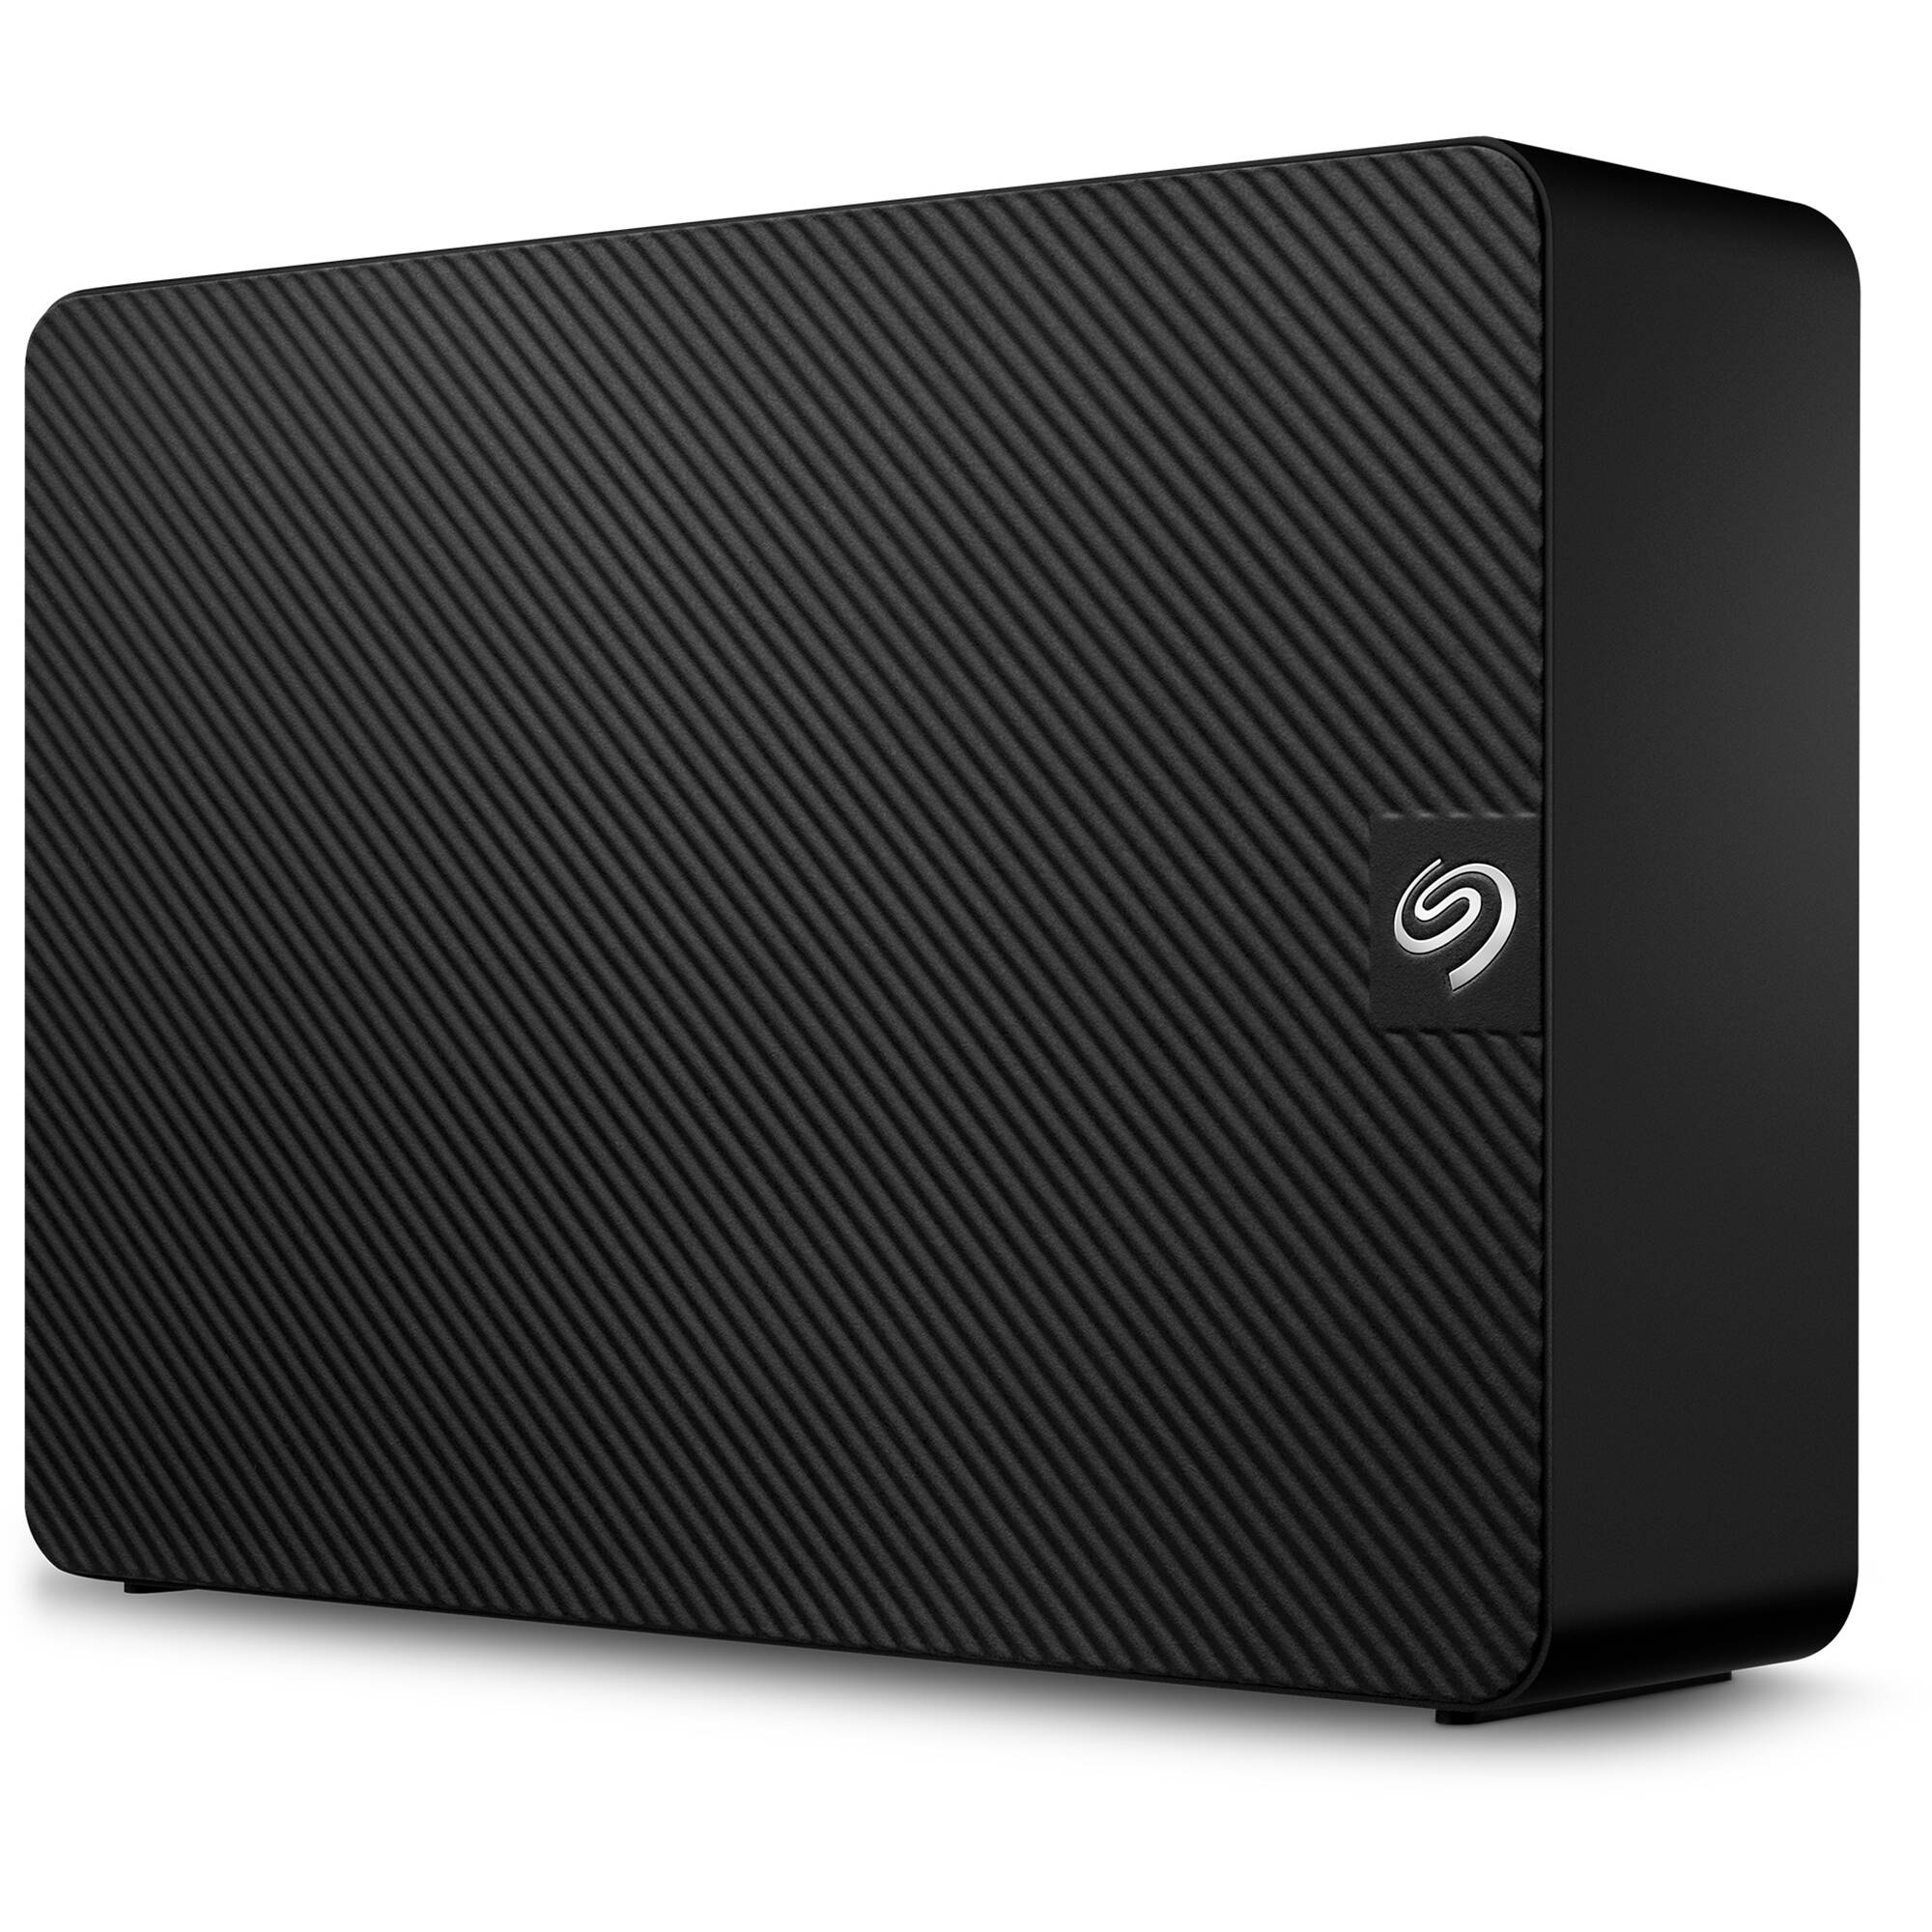 How To Use Your Seagate External Hard Drive On Mac 9